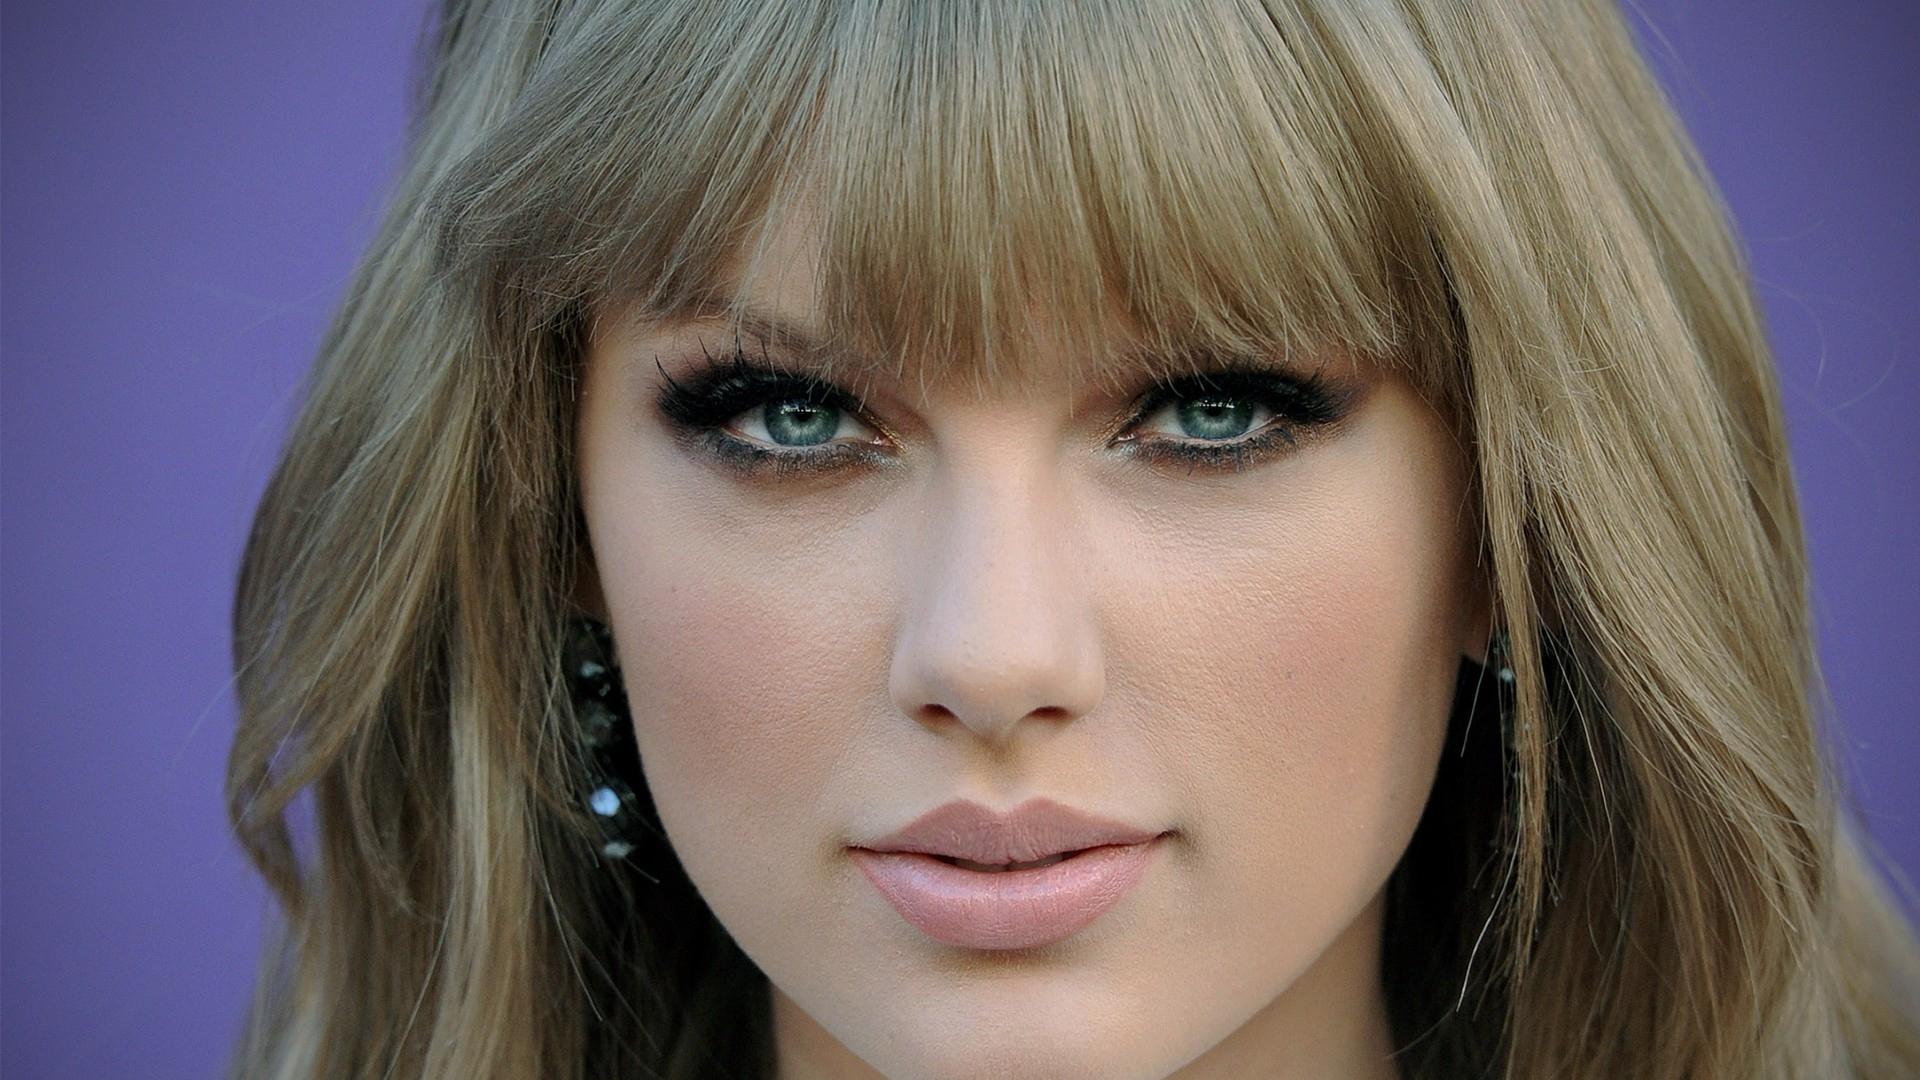 TAYLOR SWIFT HEIGHT WEIGHT AGE BIOGRAPHY (UPDATED JAN 2019). Lost